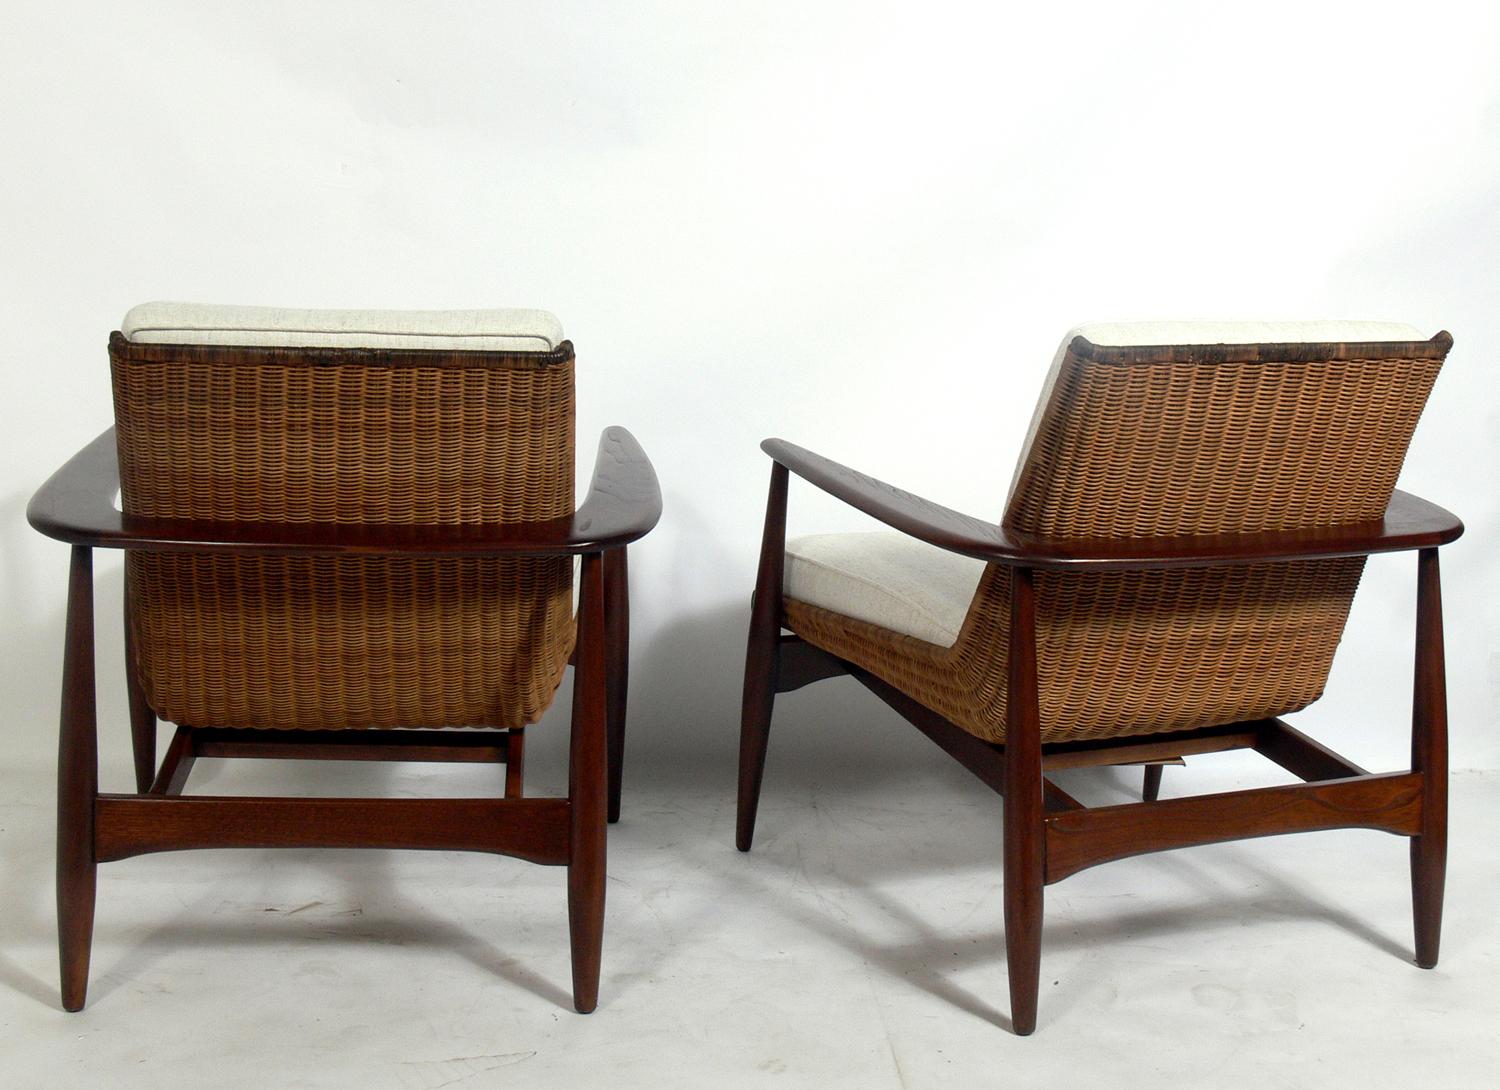 lawrence peabody chairs